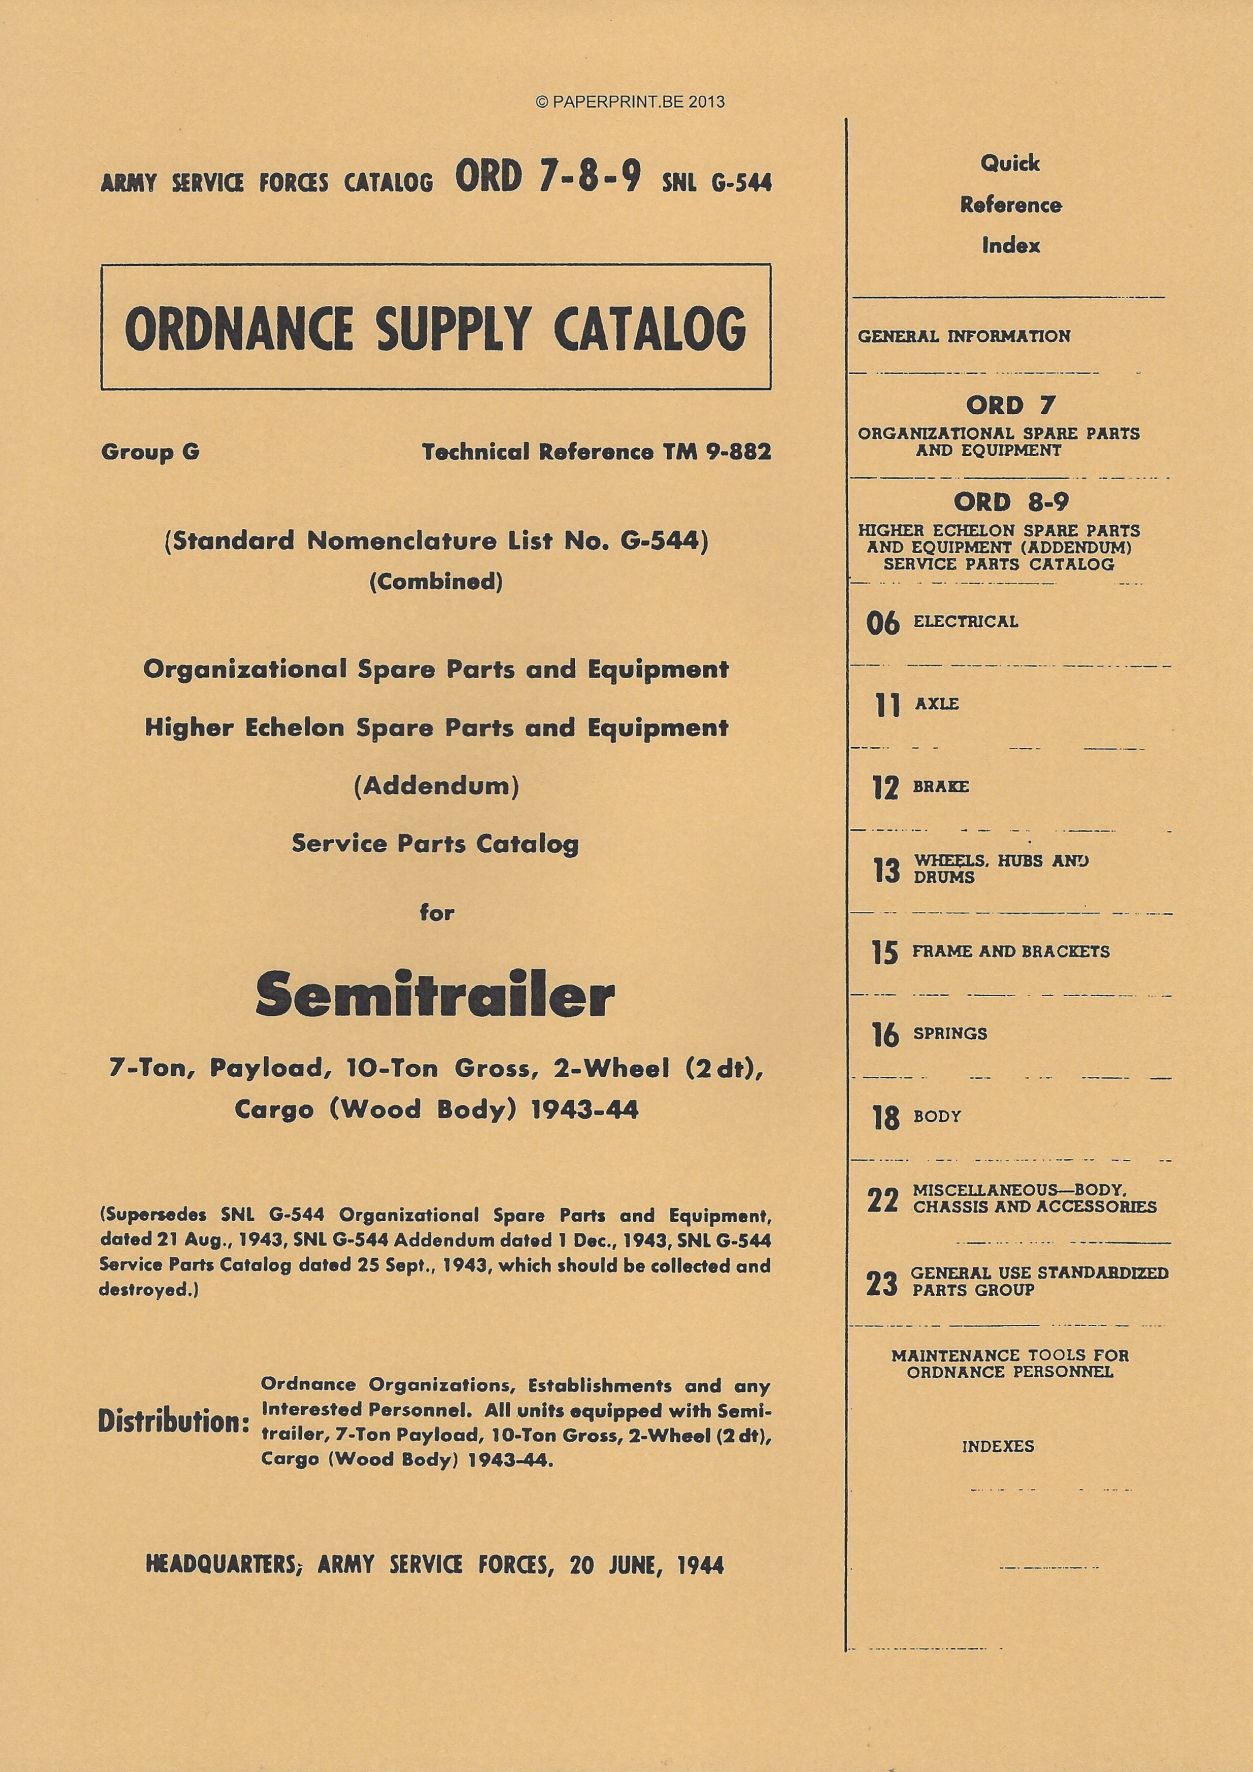 SNL G-544 US SERVICE PARTS CATALOG FOR SEMITRAILER 7-TON, PAYLOAD, 10-TON GROSS, 2-WHEEL (2DT), CARGO (WOOD BODY) 1943-44